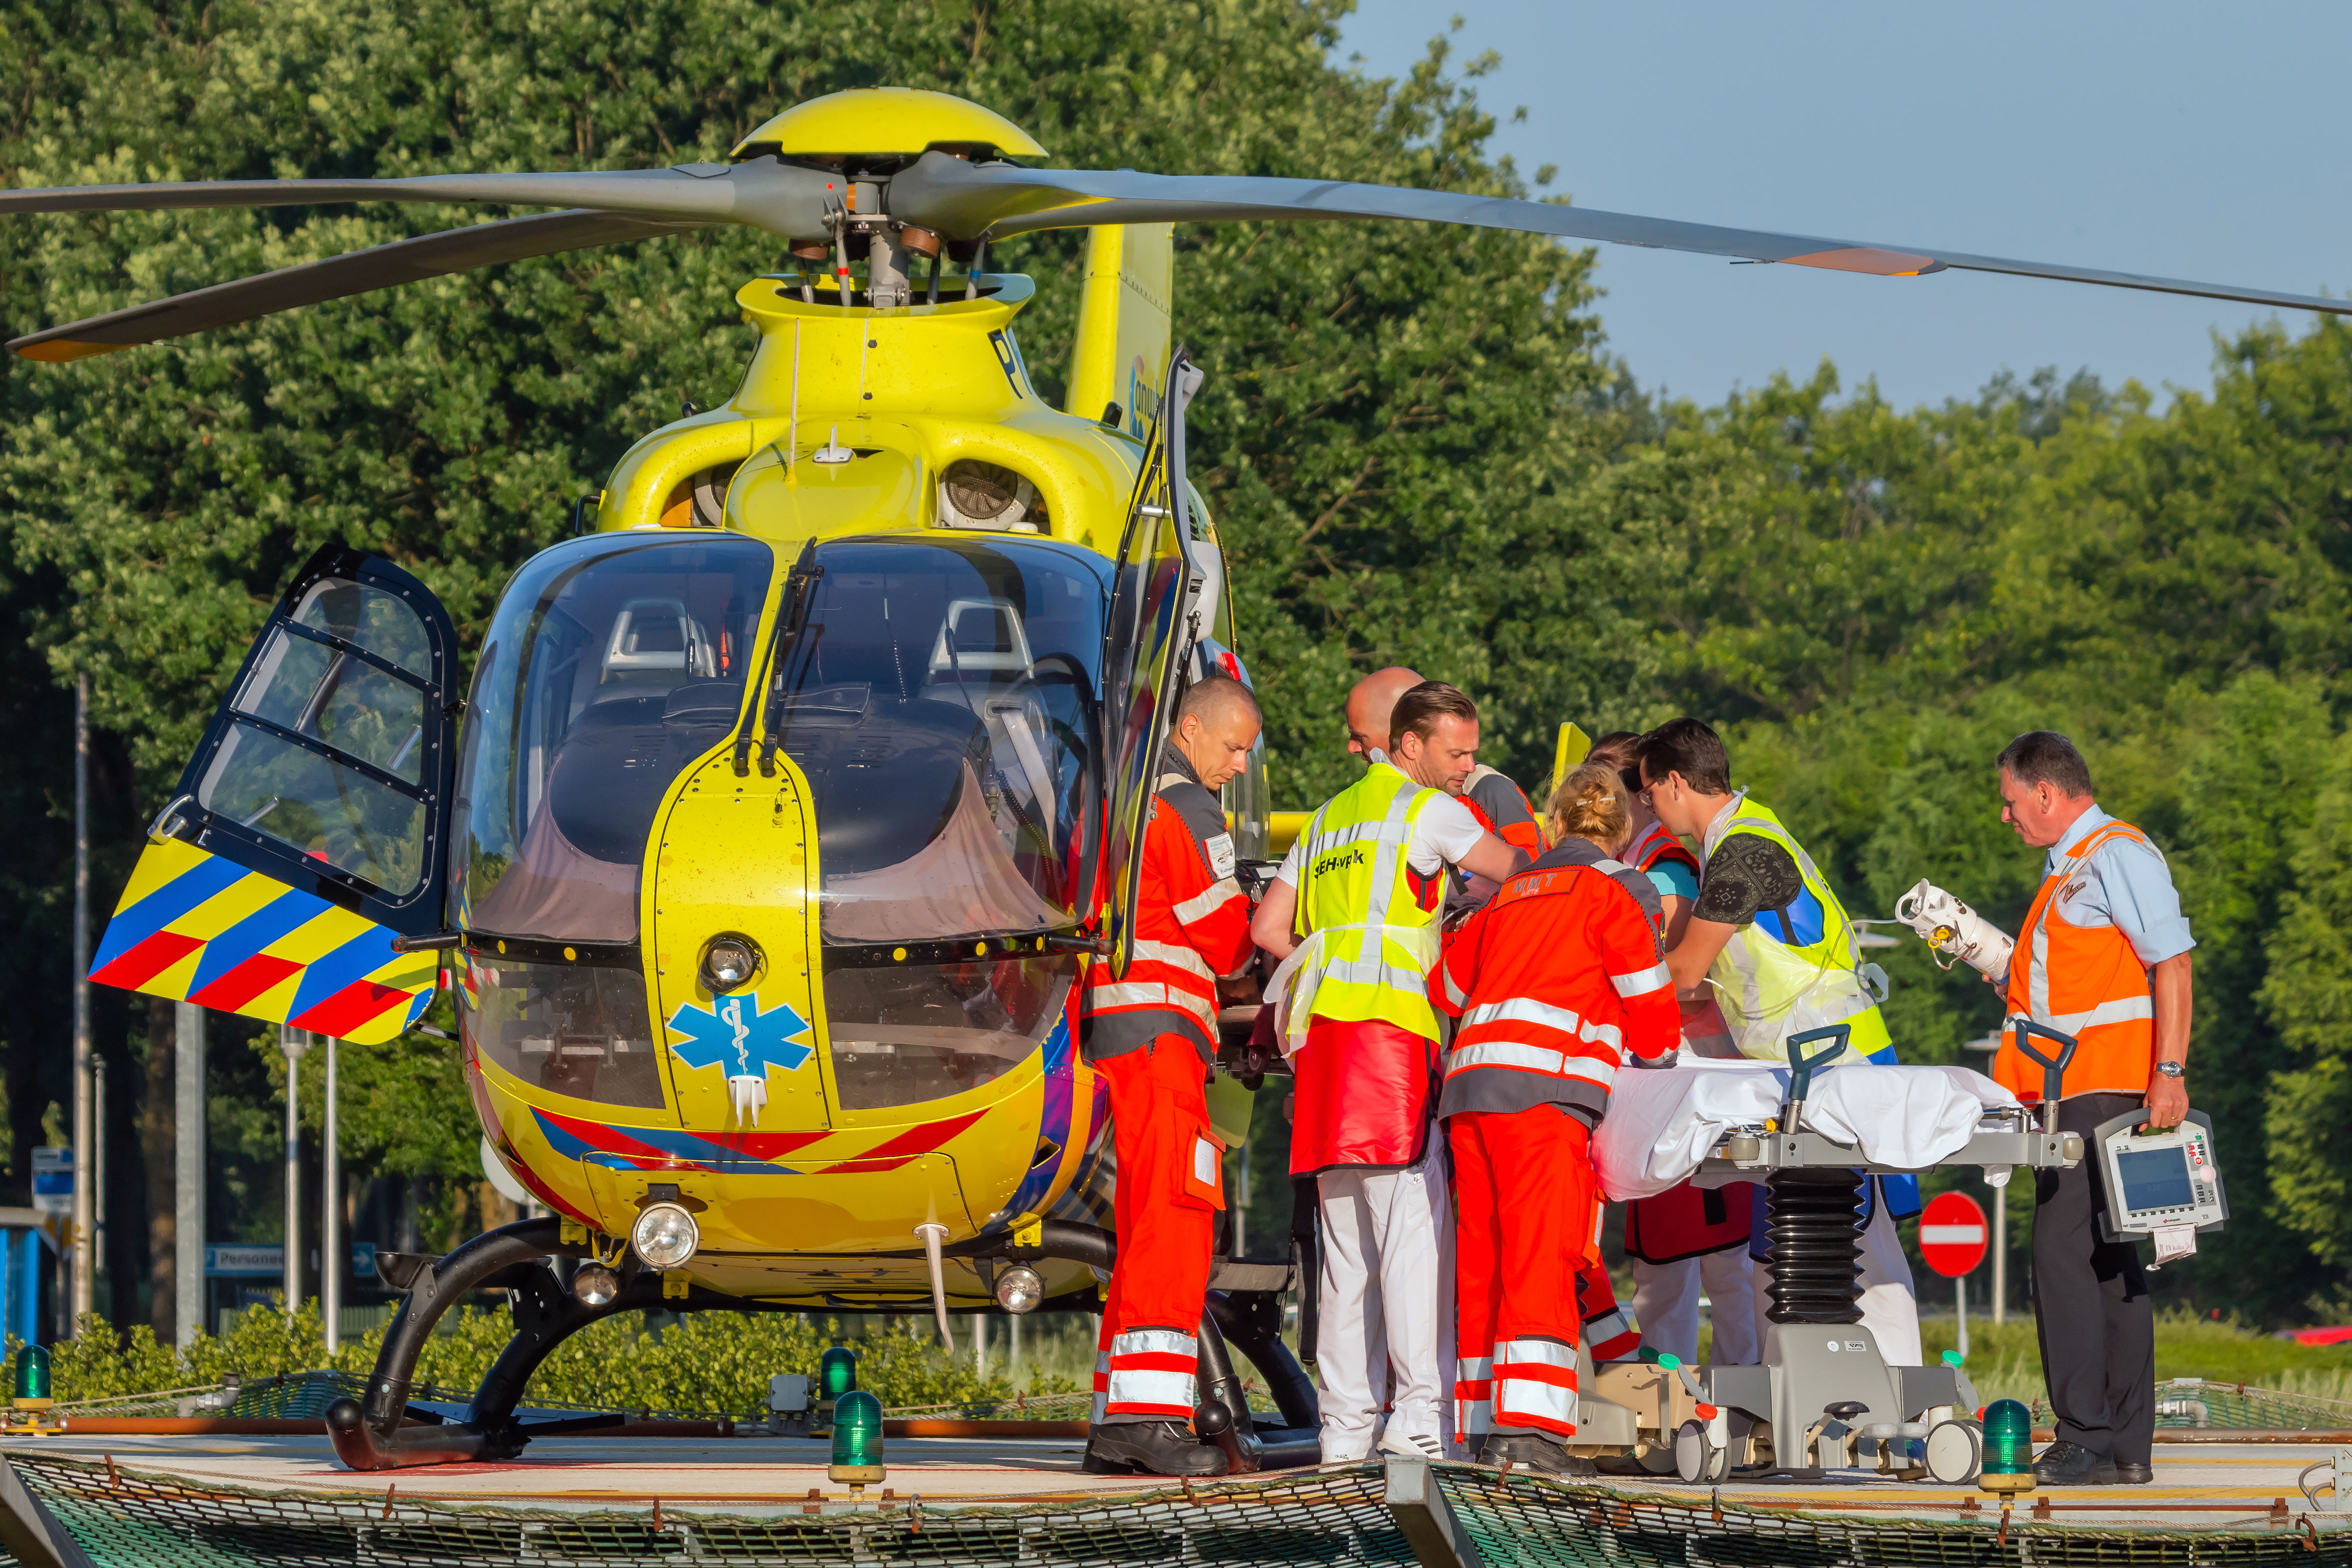 Traumahelikopter in actie